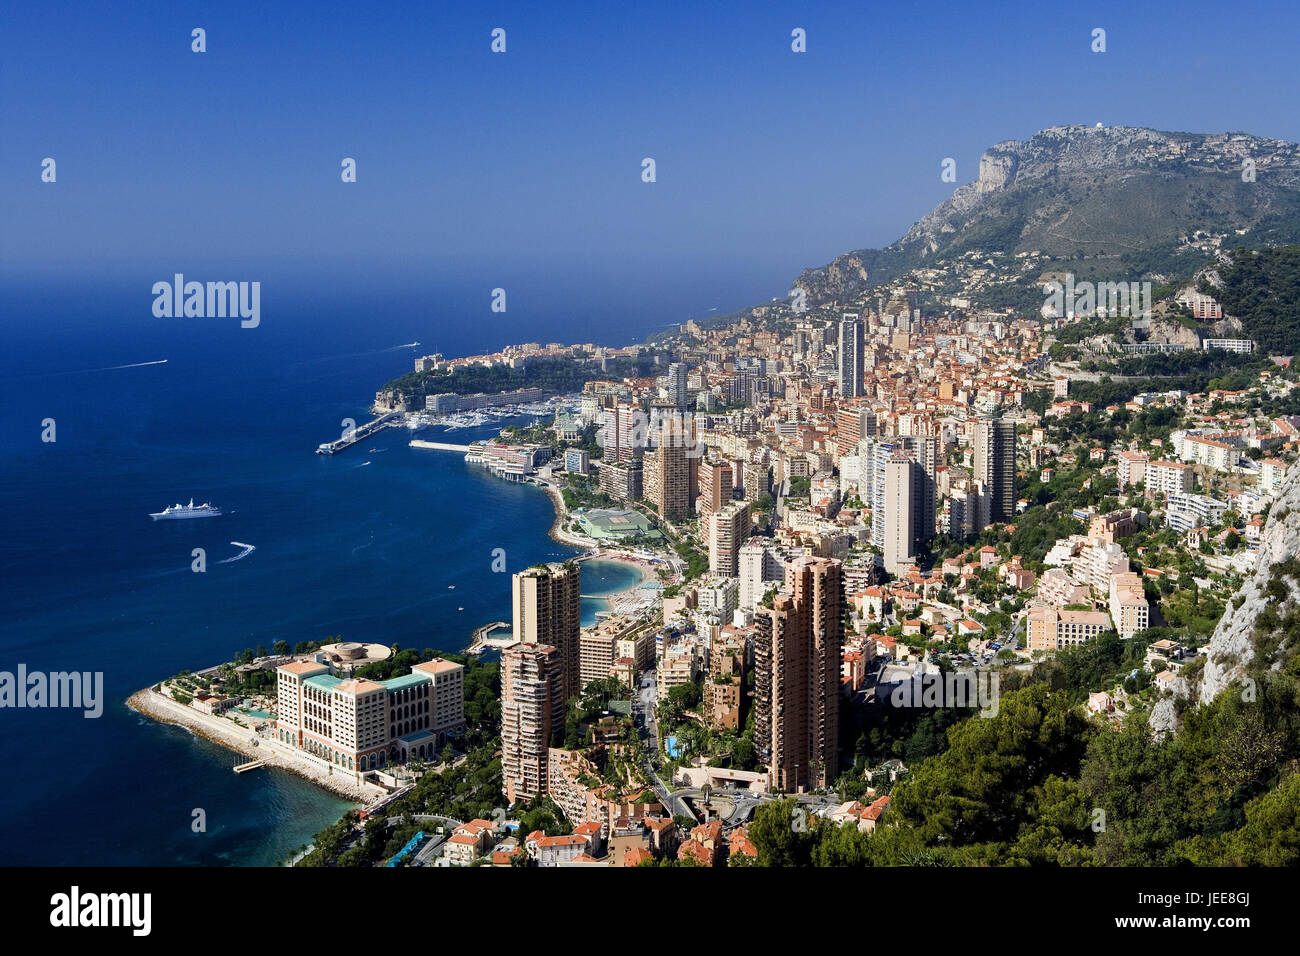 Monaco, Monte Carlo, town overview, the Mediterranean Sea, principality, Riviera, Mediterranean coast, houses, residential houses, high rises, hotels, harbour, destination, tourism, wealth, luxury, jet set, tax haven, Stock Photo